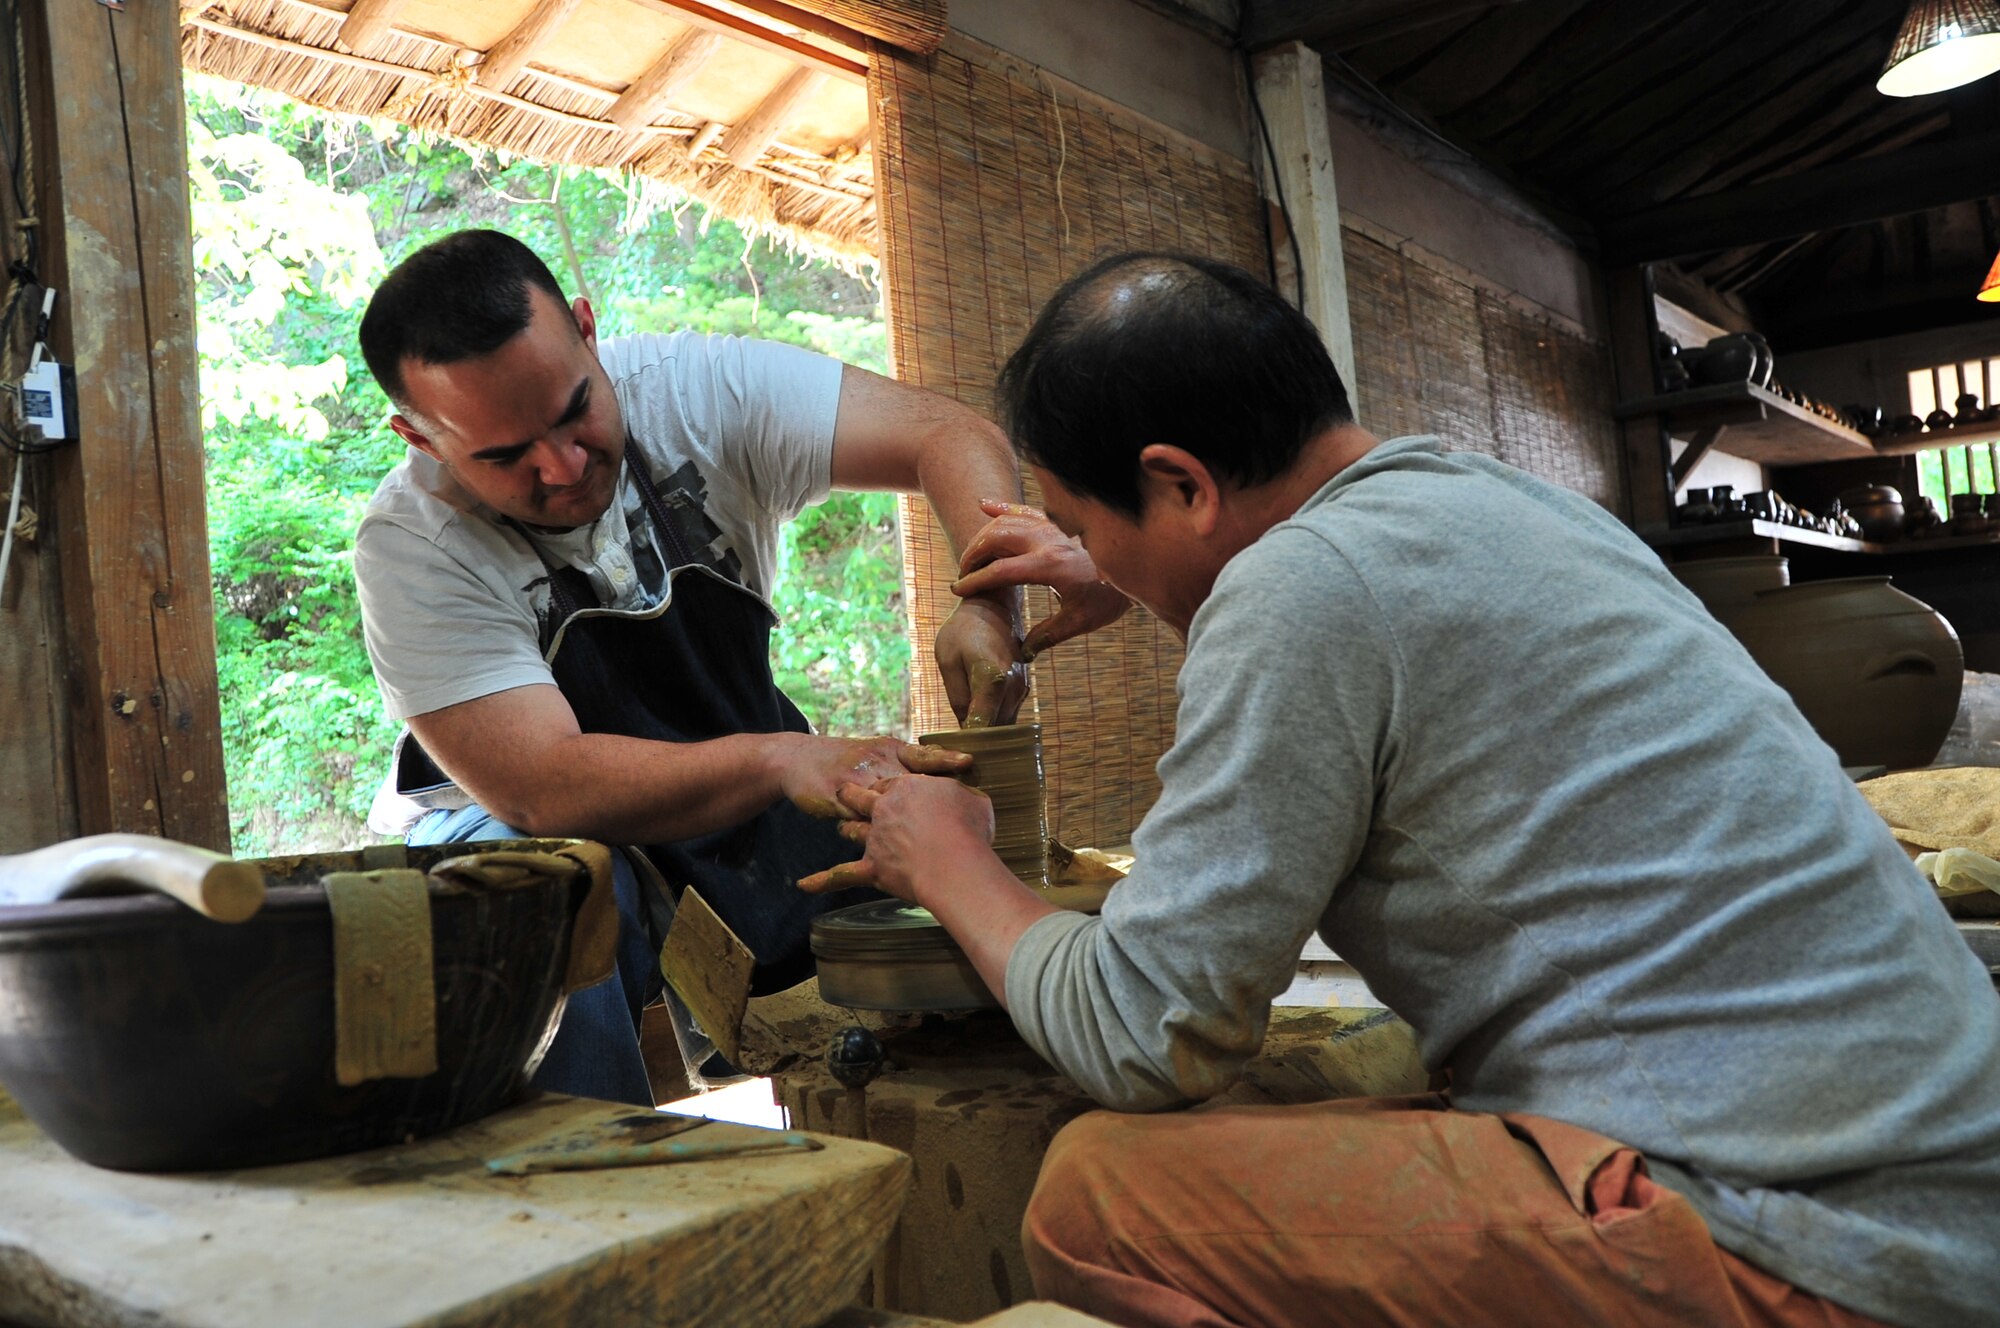 Tech. Sgt. Paul Cassidy, 7th Air Force A3/5, tries his hand at Korean pottery with the help of Lee Yong Hyun during a trip to the Korean Folk Village as part of the 7th Air Force Head Start Program May 16, 2014. The Head Start Program, funded by the government of Gyeonggi-do and taught by Pyeongtaek University, is a three-day program designed to introduce U.S. servicemembers and their families to Korean culture. The program has been open to members of 8th Army for eight years, but only recently became available to members of 7th Air Force here at Osan. The goal of the program is to give the members of Osan Air Base and their families a better understanding of the culture.  (U.S. Air Force photo by Tech. Sgt. Thomas J. Doscher)